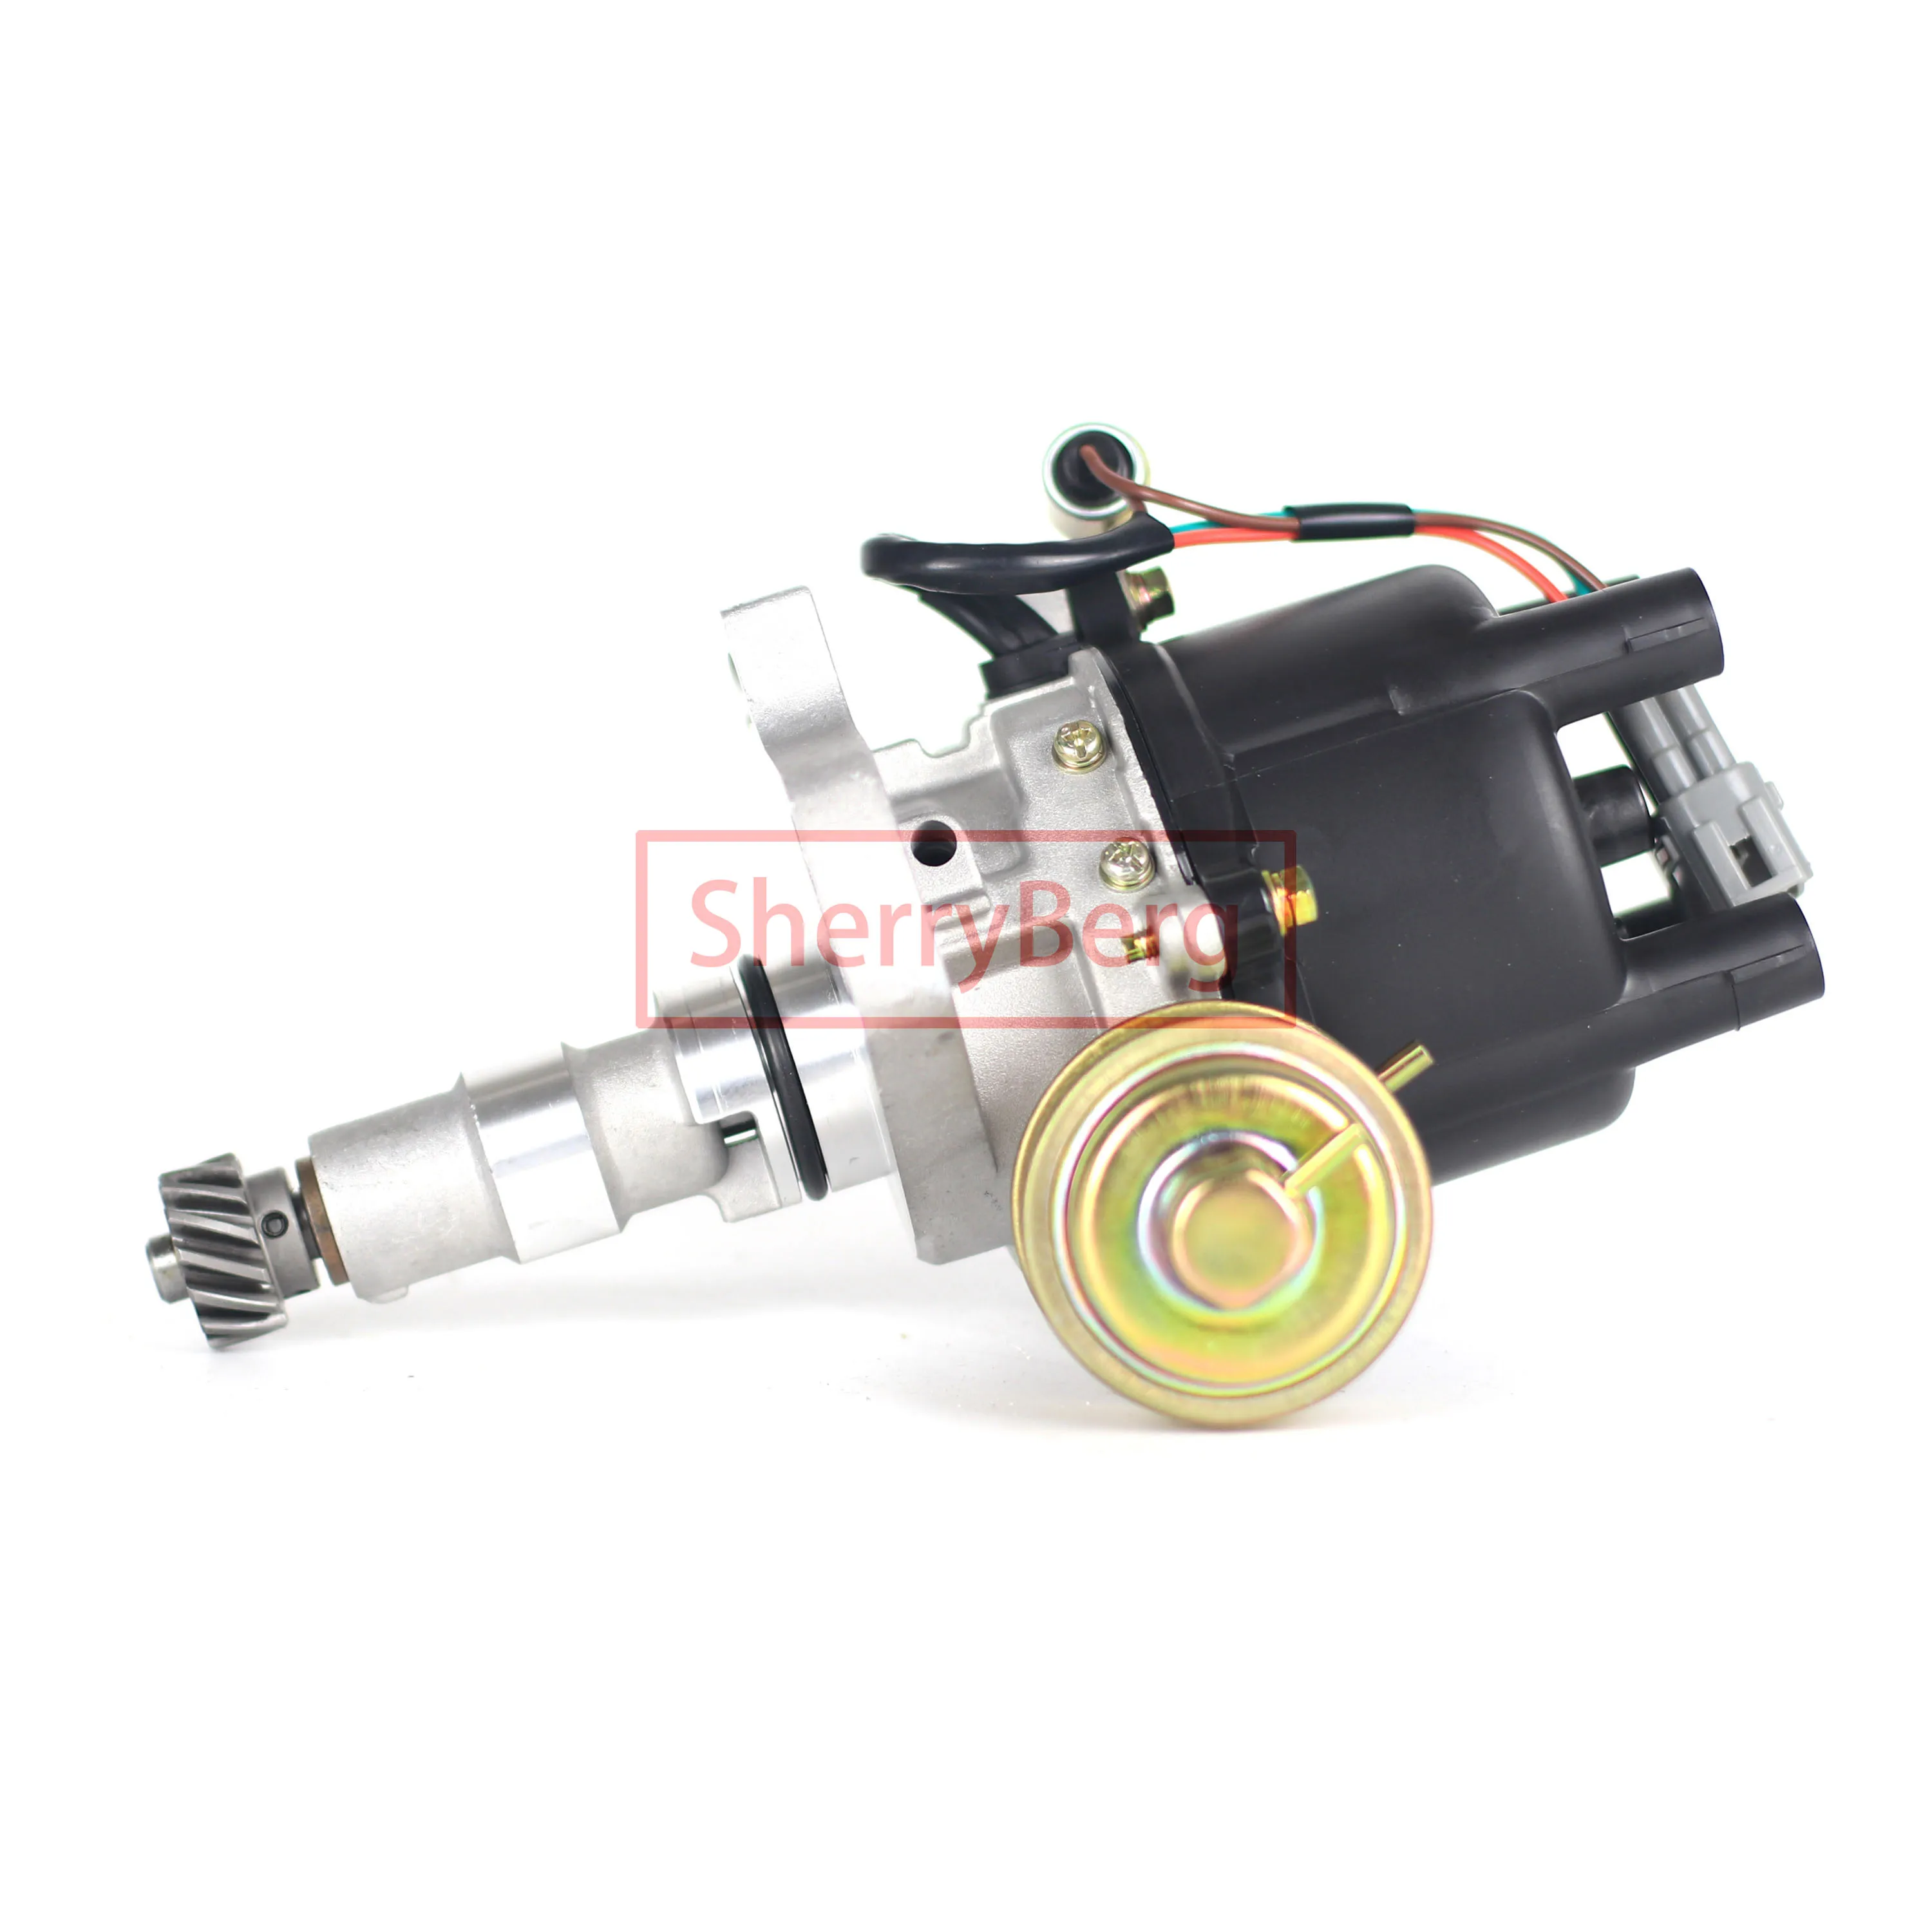 

SherryBerg Distributor Assembly Complete Distributor fit for Toyota Hilux Hiace 2.4L 1RZ 2RZ 3RZ PICKUP 19100-75021 19100-75031